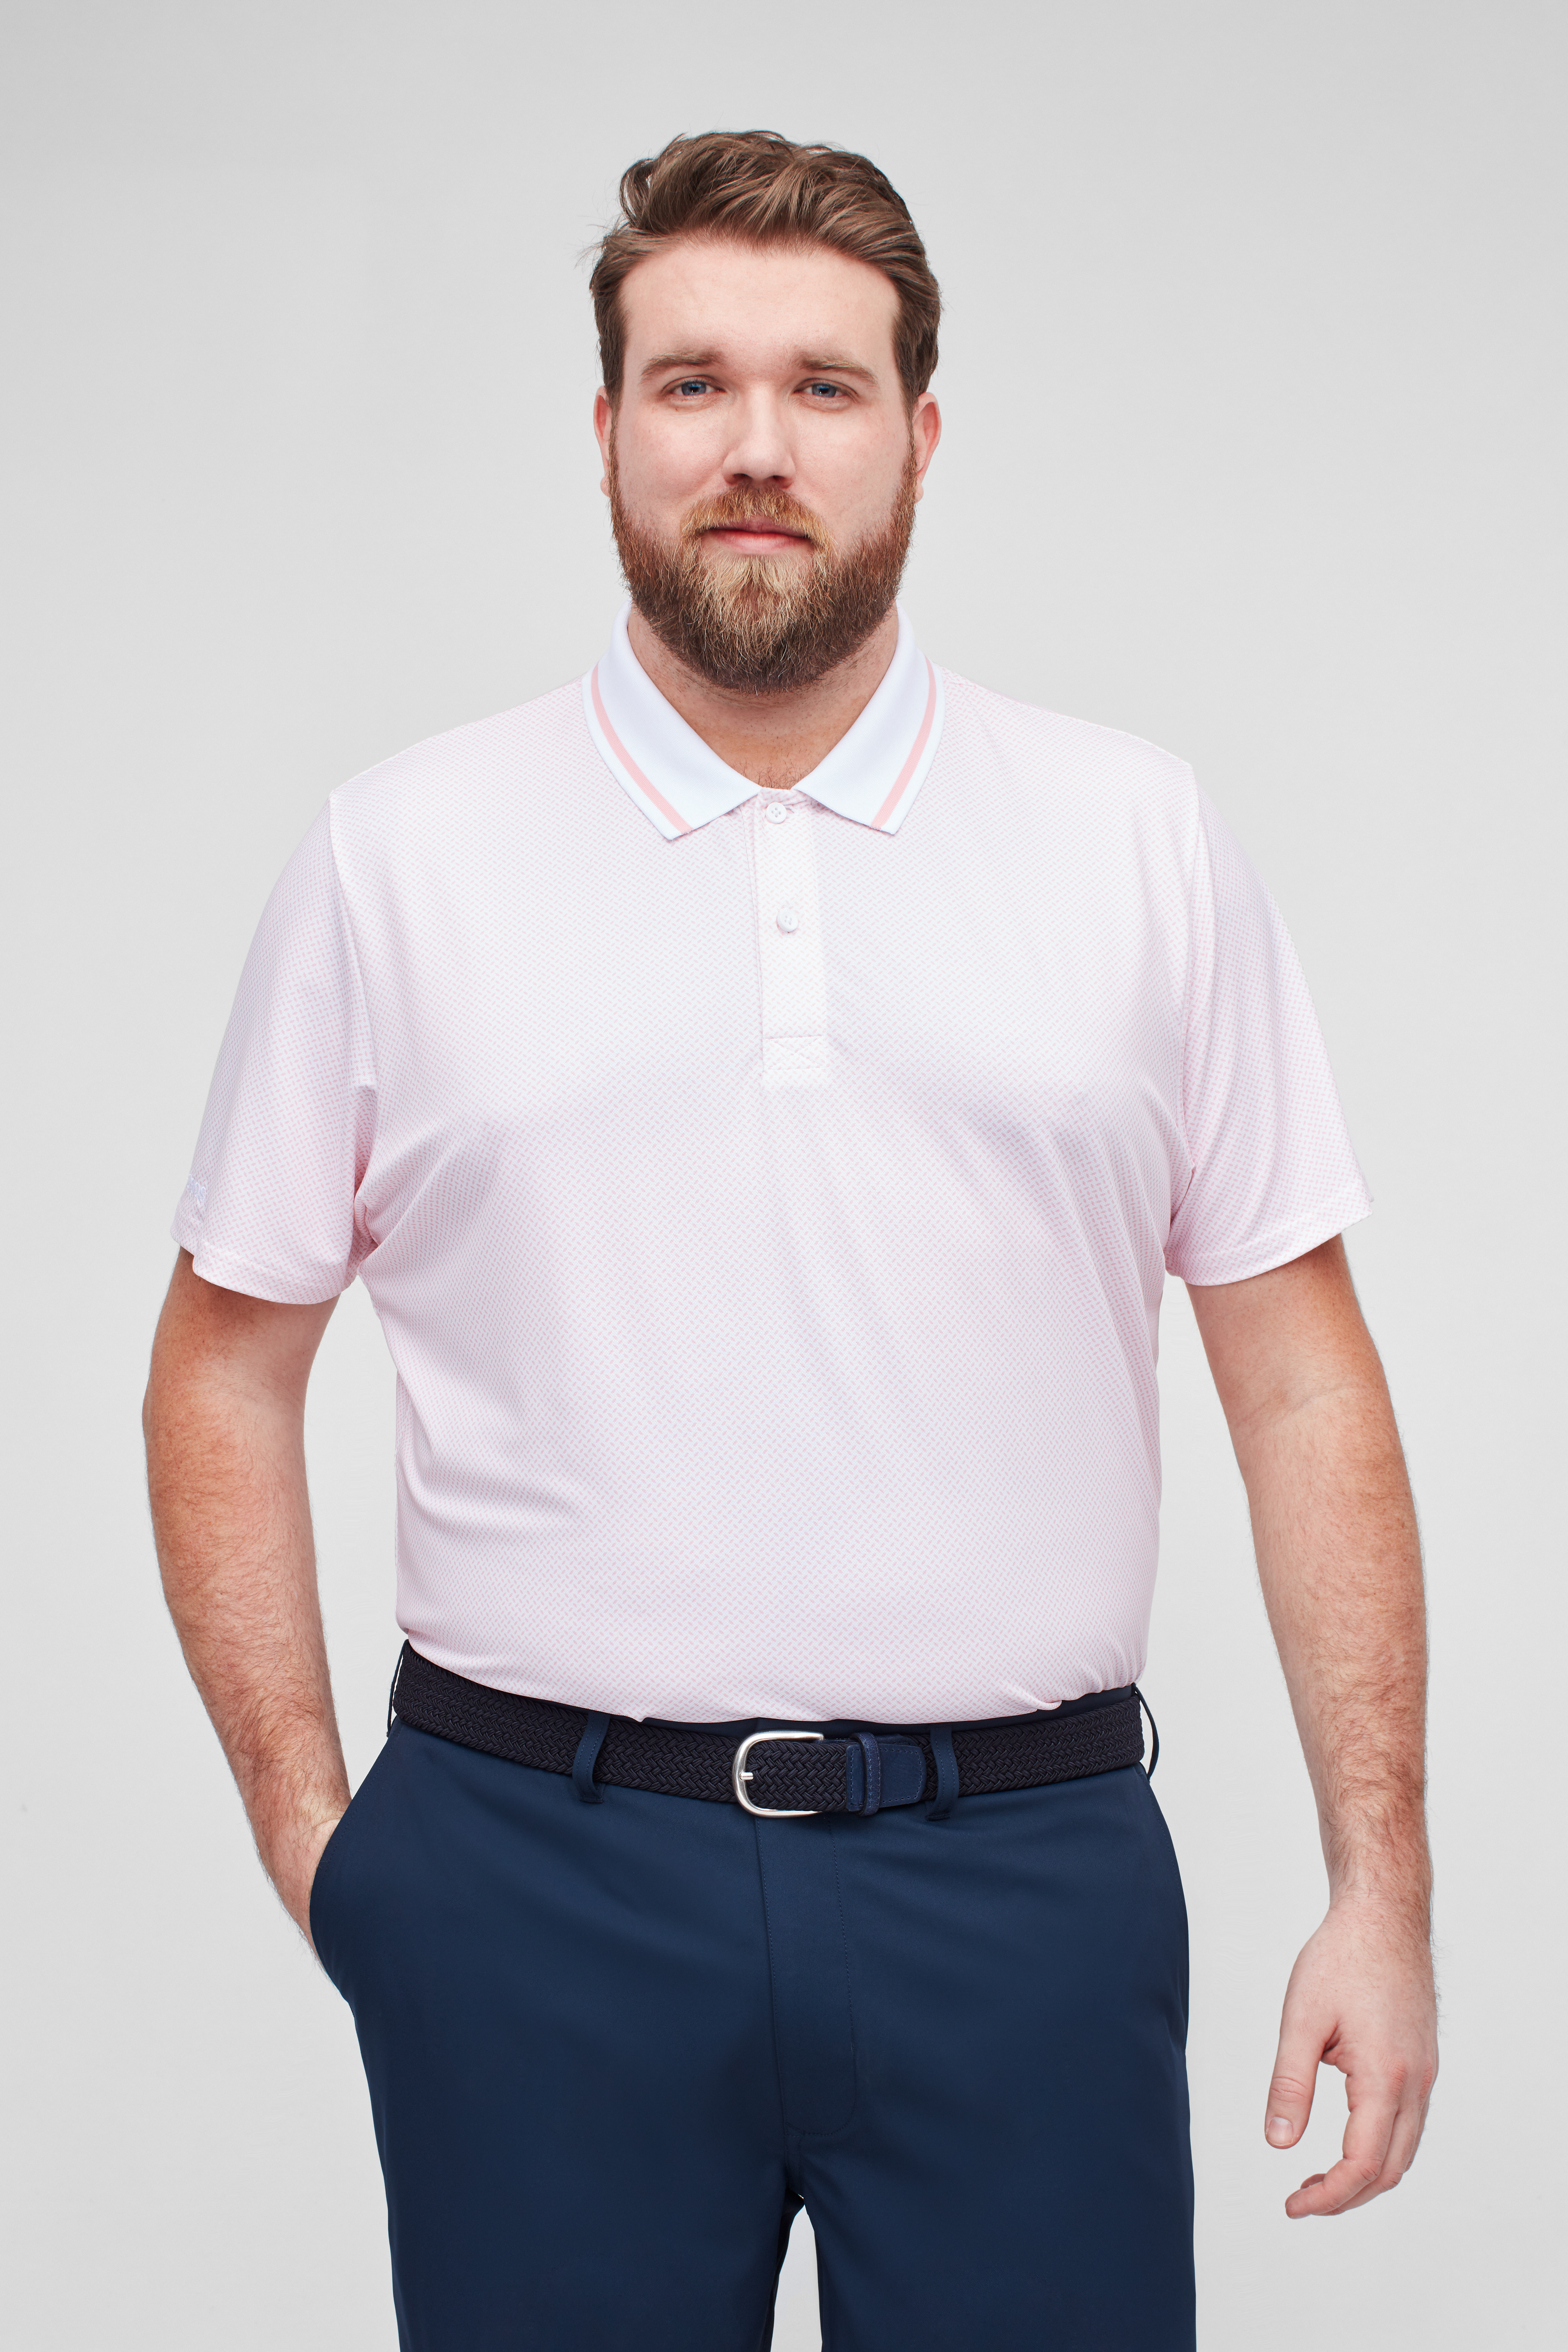 Performance Golf Polo Shirt in Extended Sizes